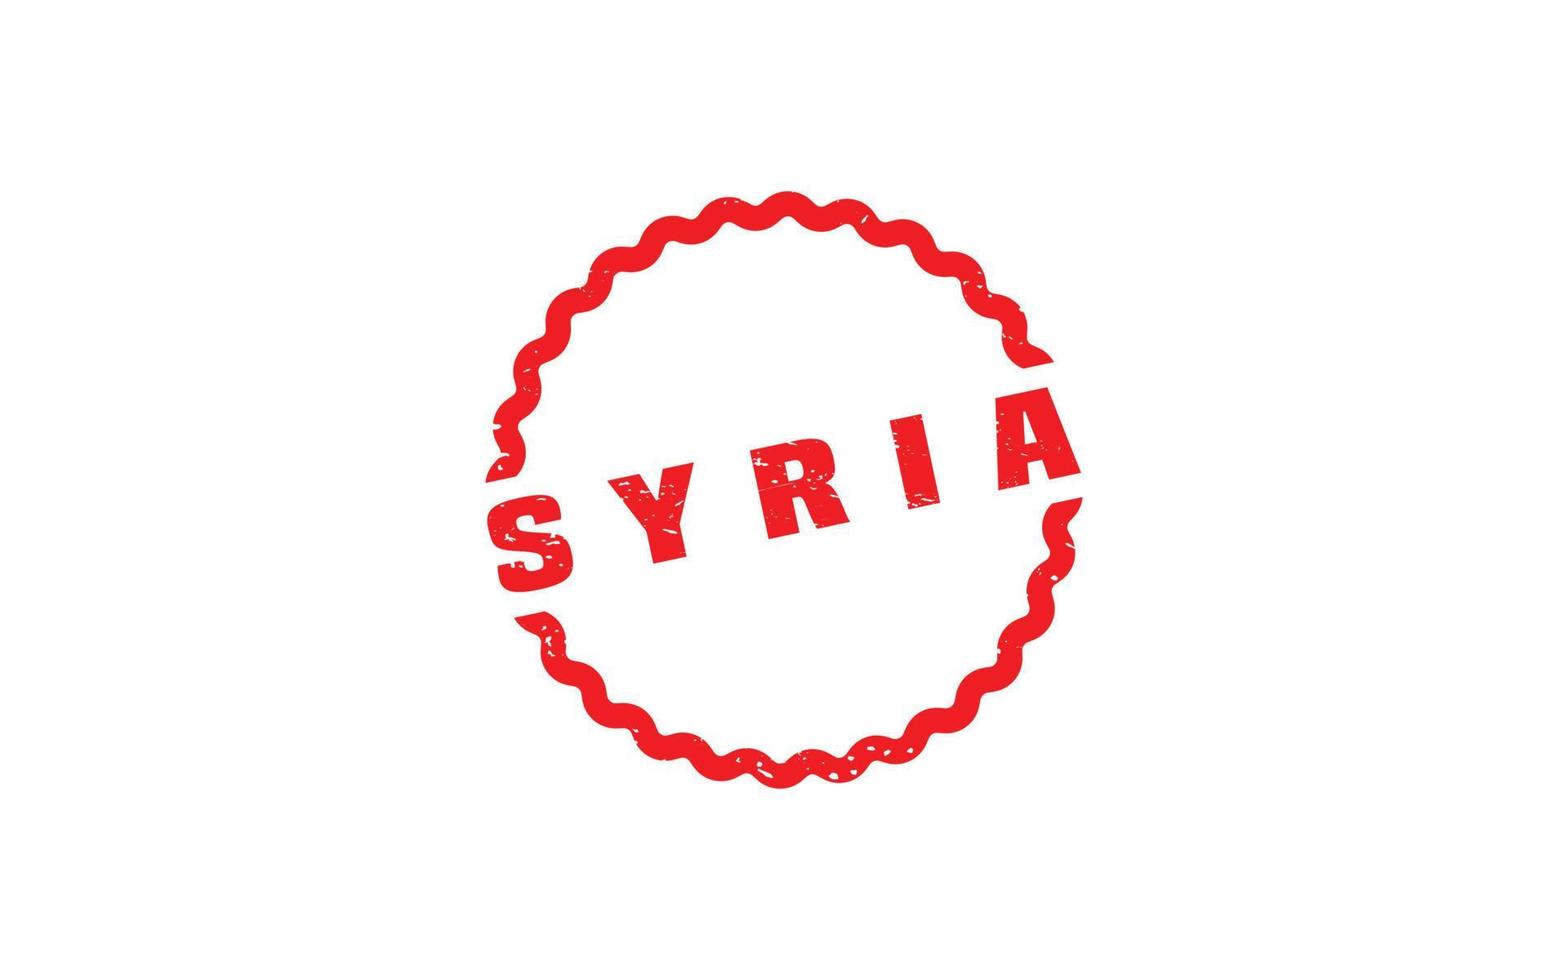 SYRIA stamp rubber with grunge style on white background vector